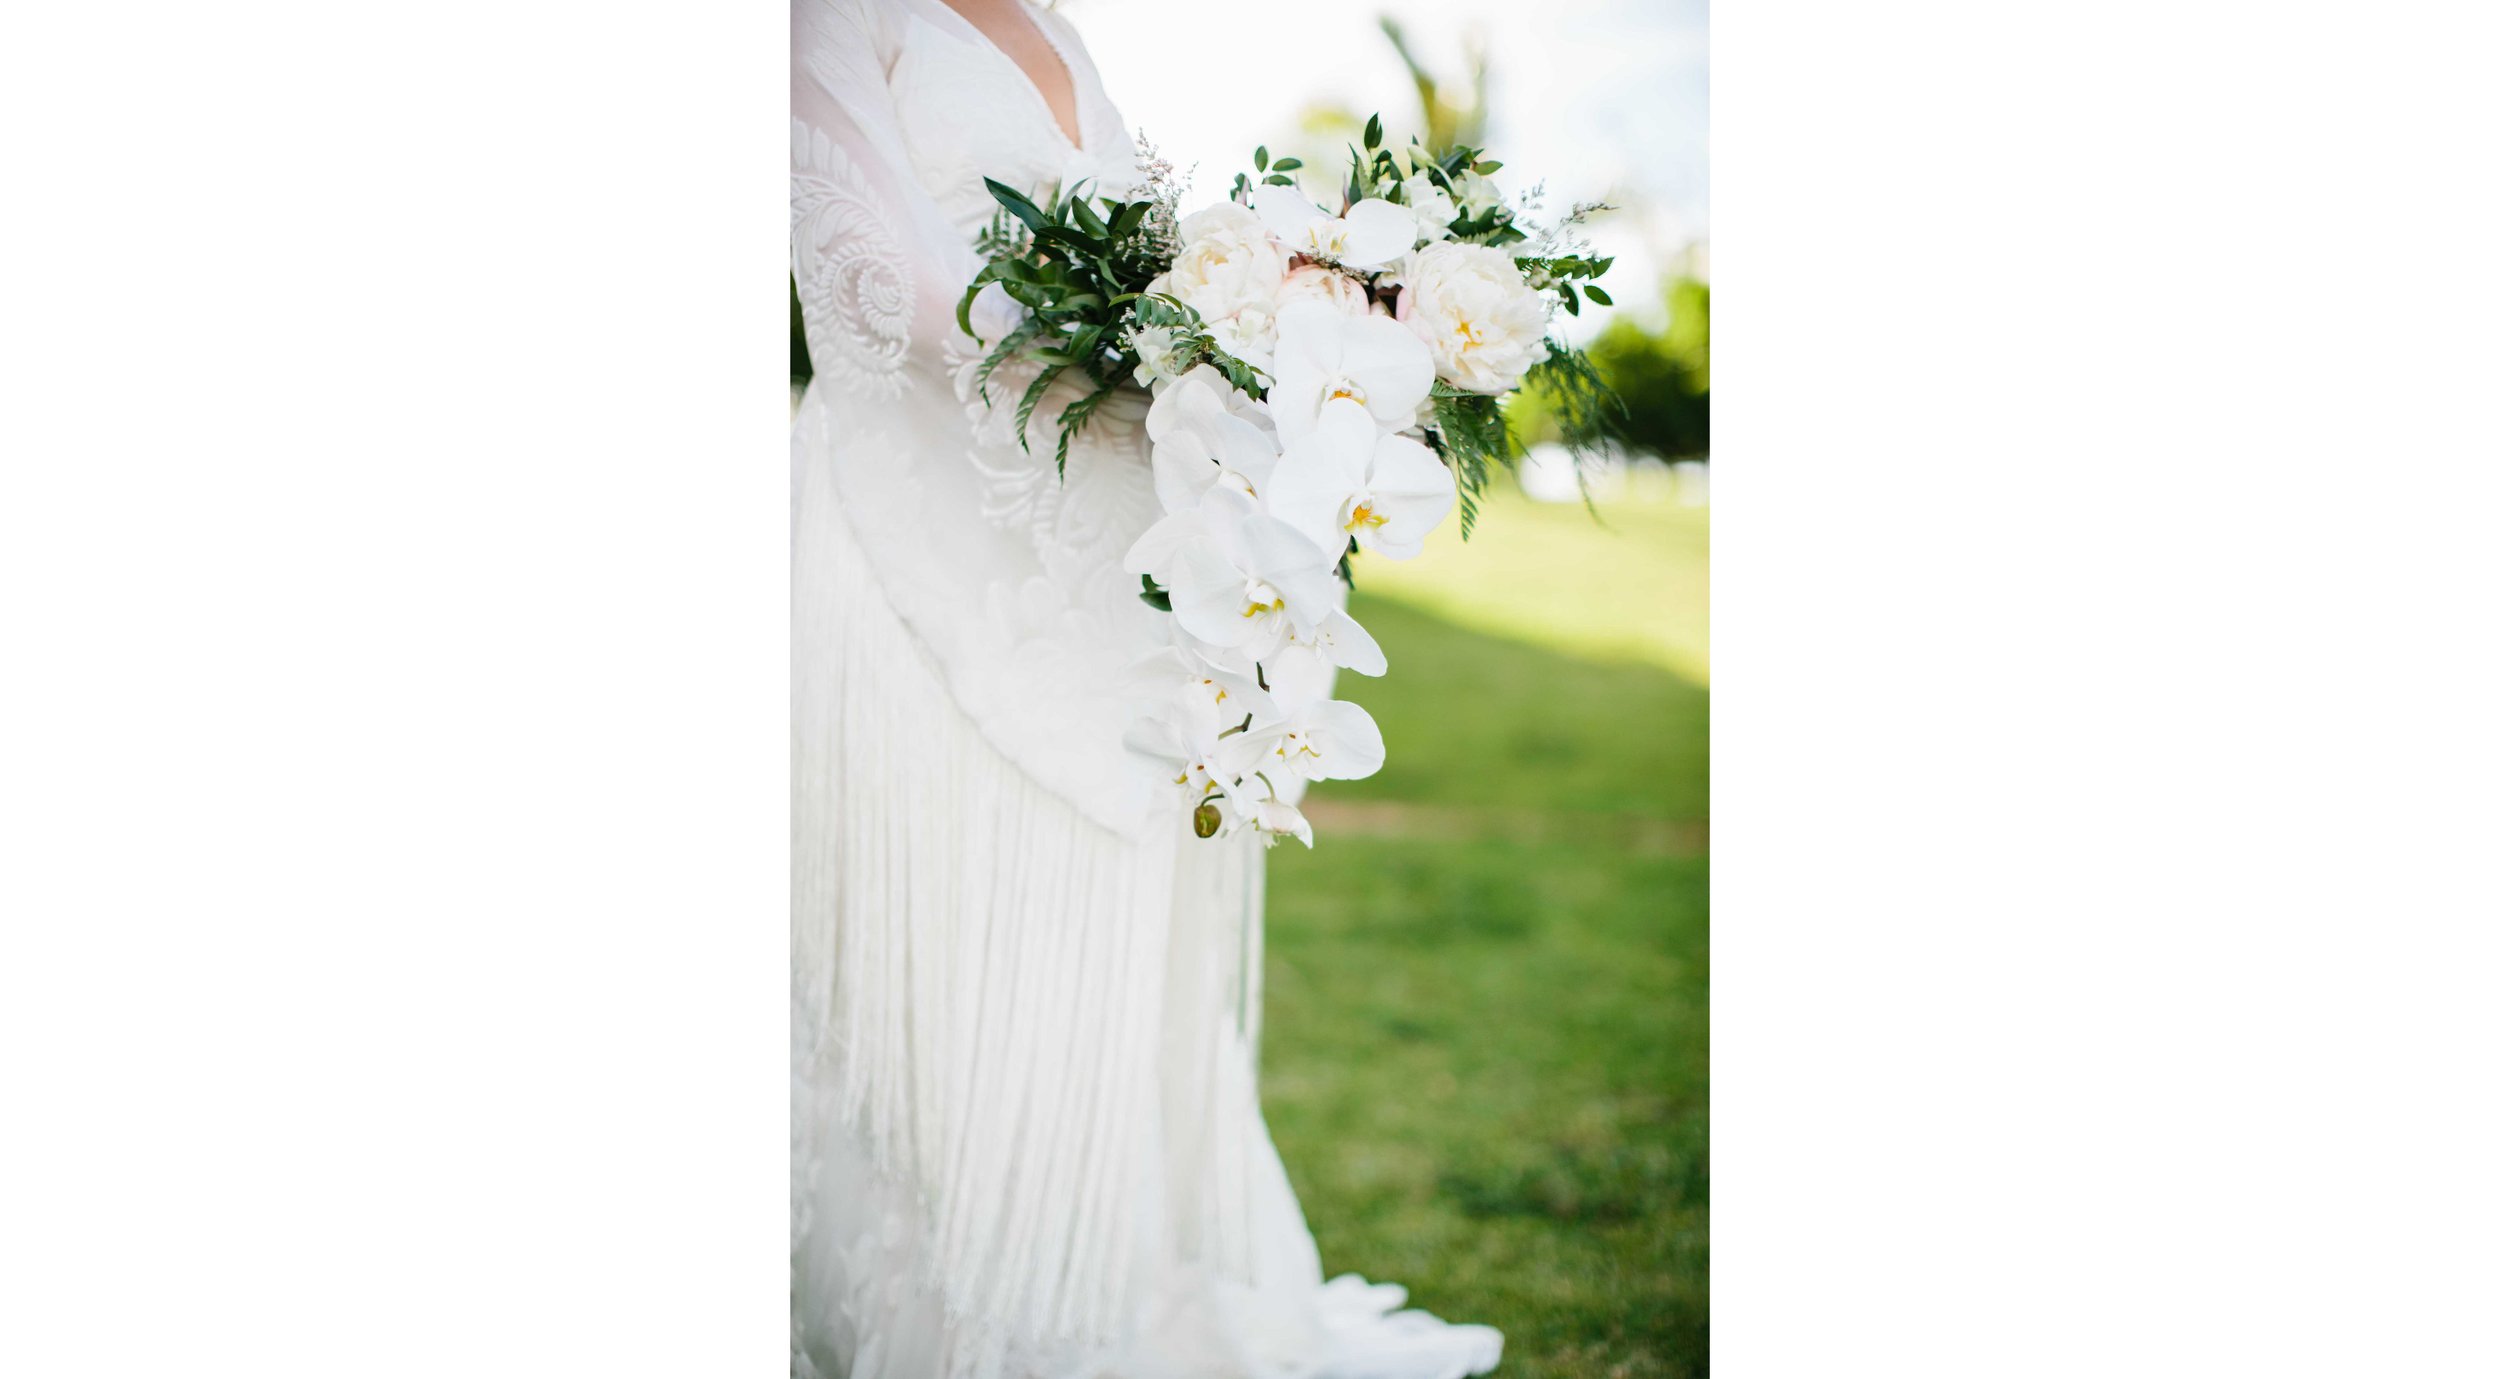 Bridal Bouquet of White Orchids and Greenery